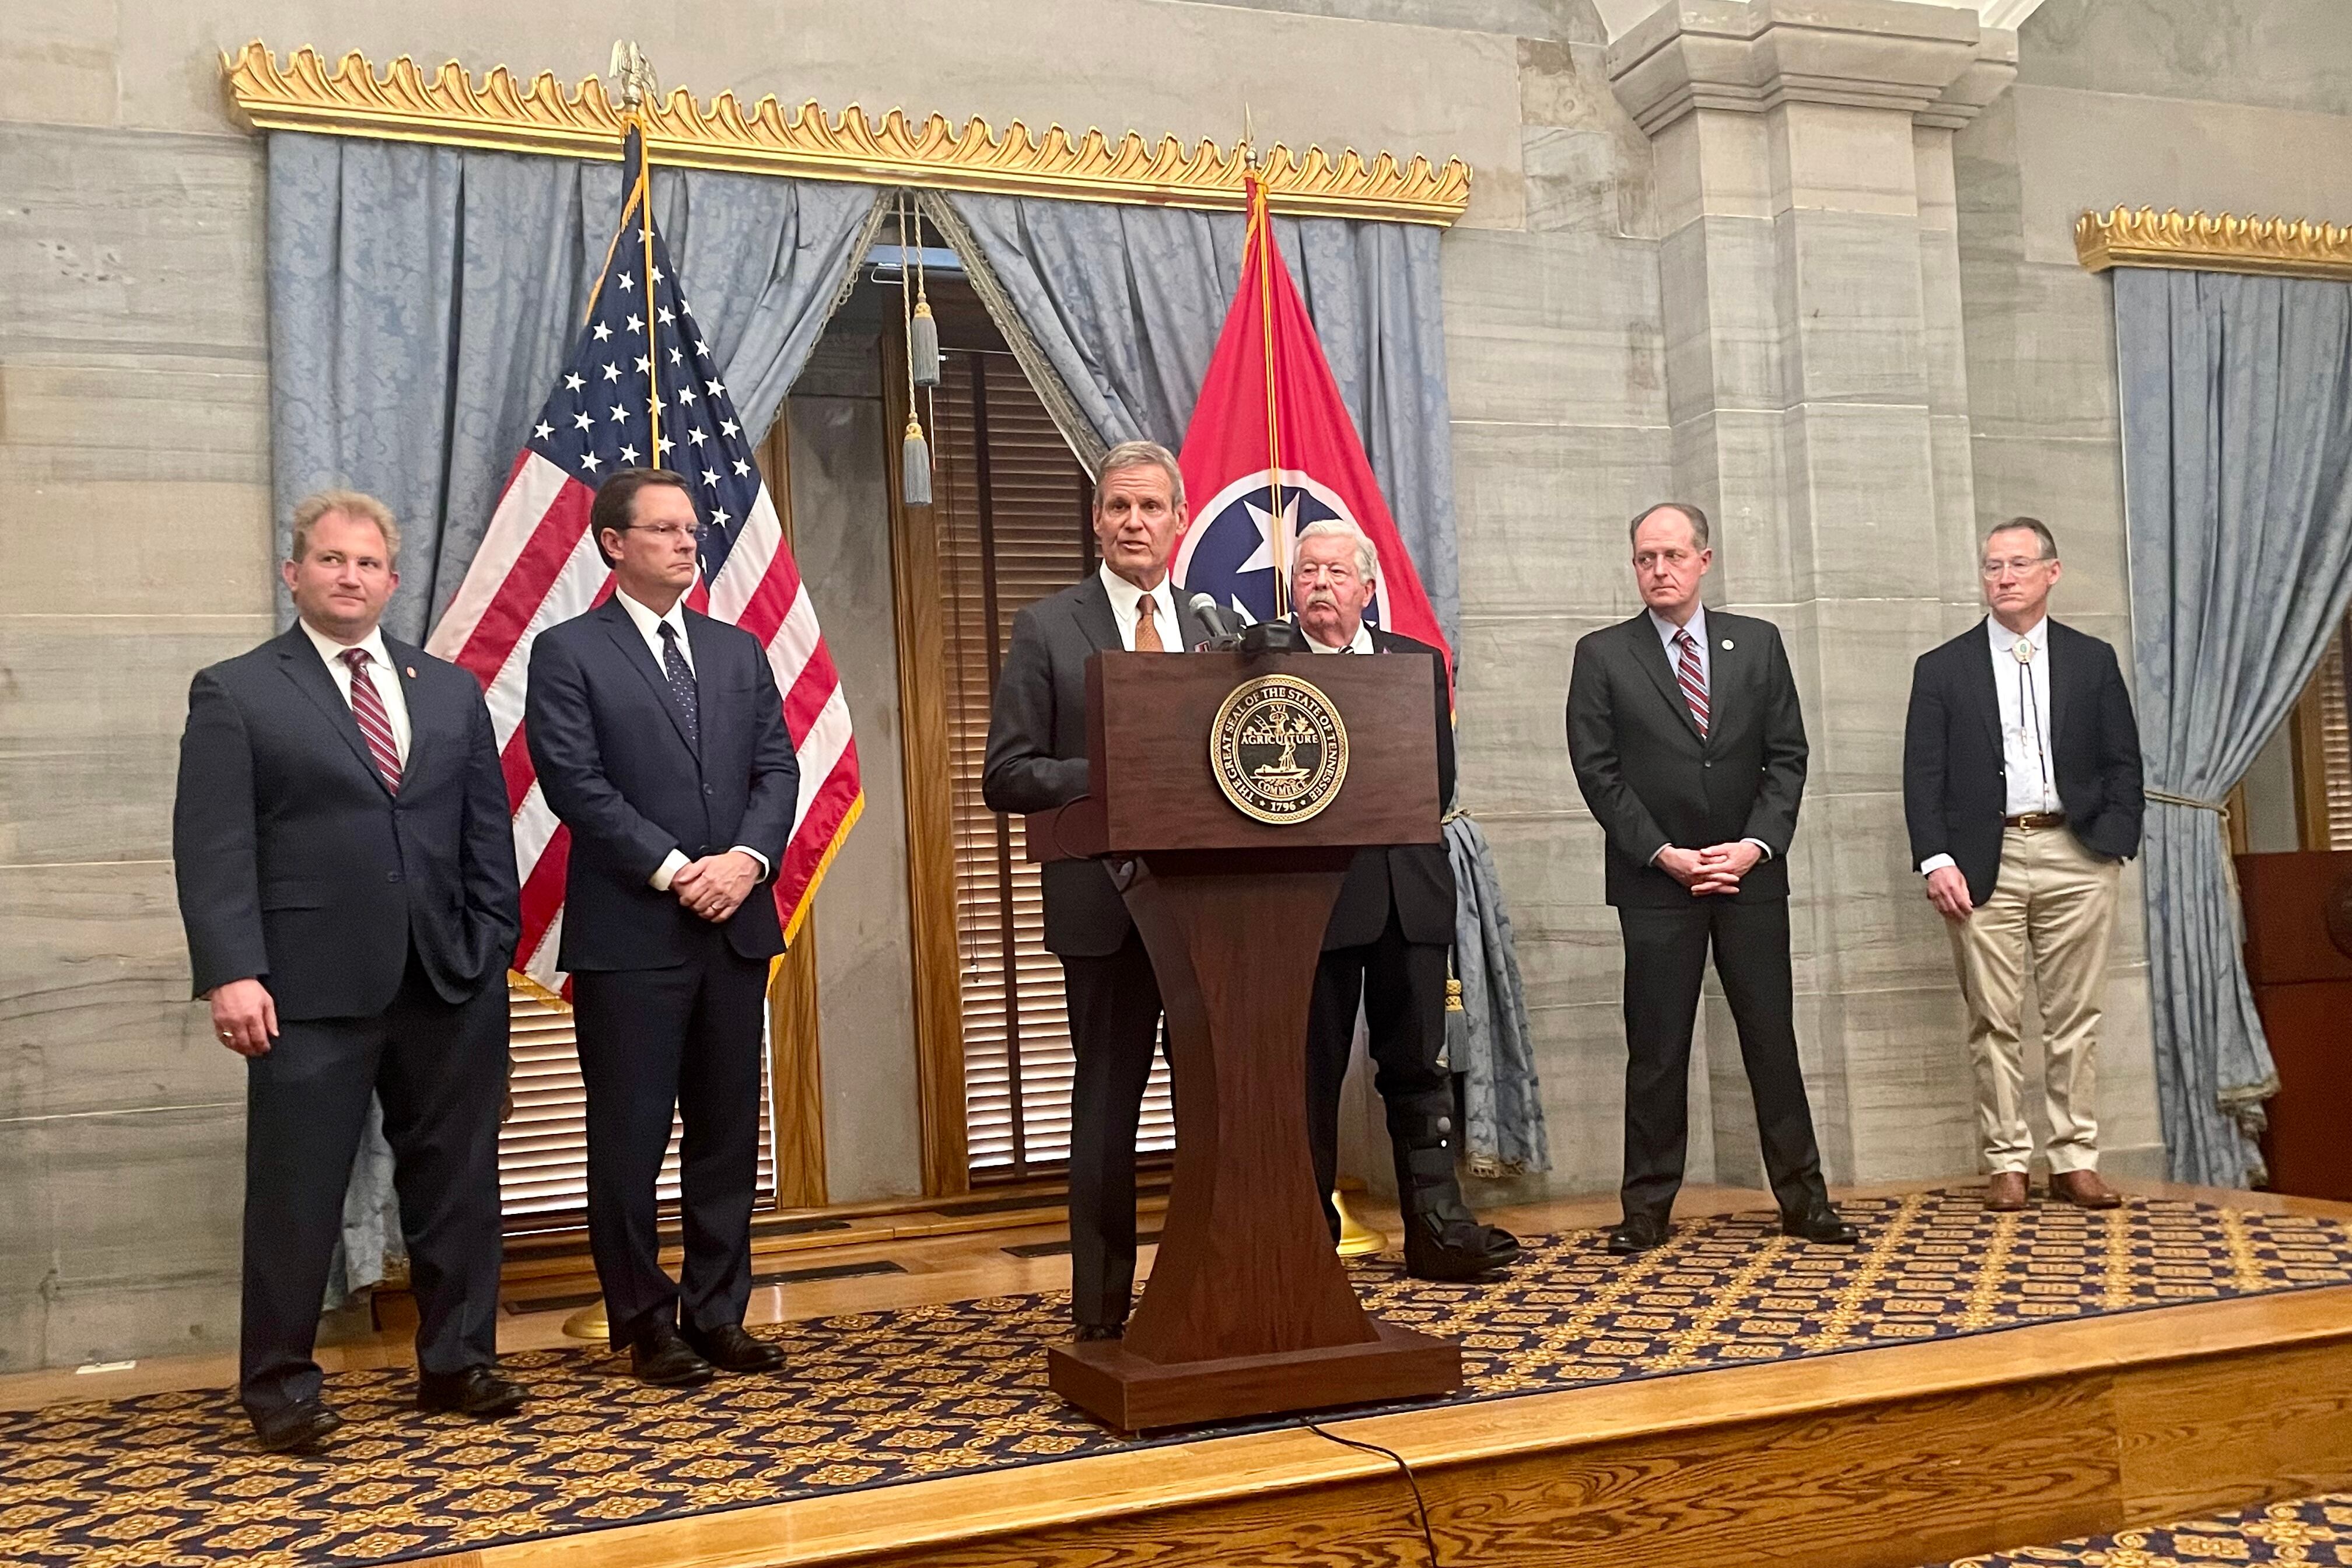 Six men wearing suits stand side by side while the person in the middle stands behind a wooden podium there is an American flag and a Tennessee state flag in the background.